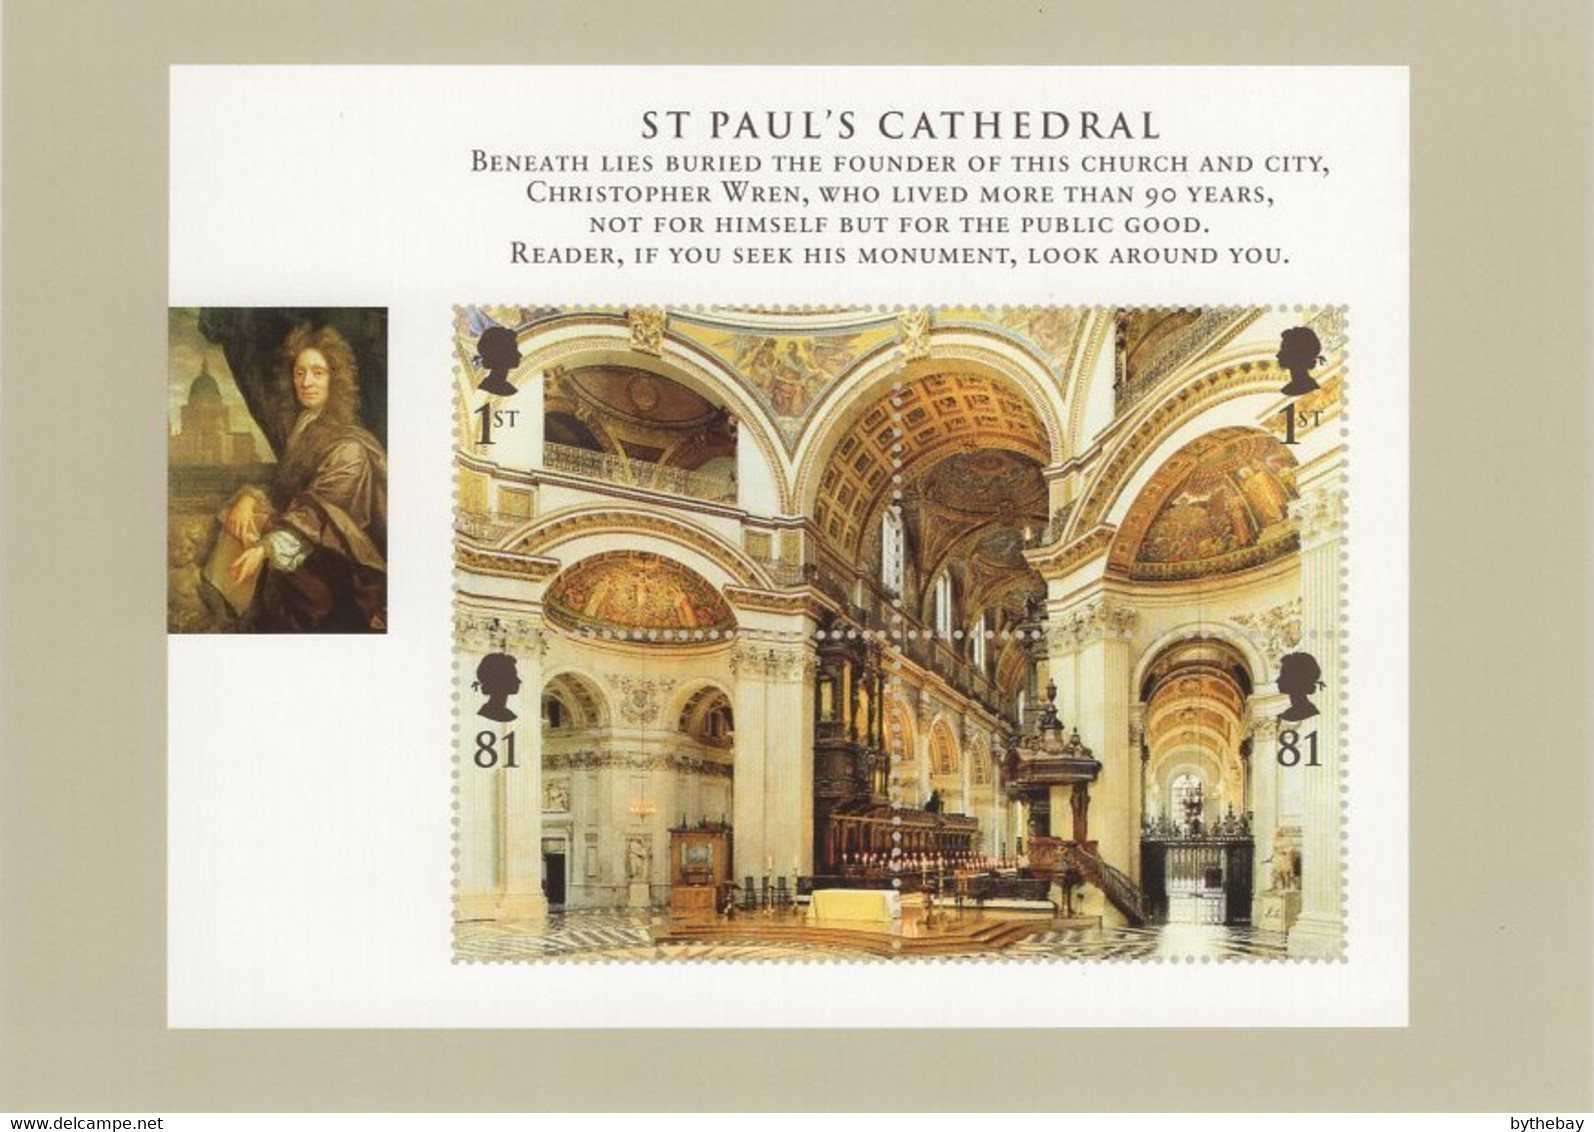 Great Britain 2008 PHQ Card Sc 2580 Interior Of St. Paul's Cathedral - PHQ-Cards